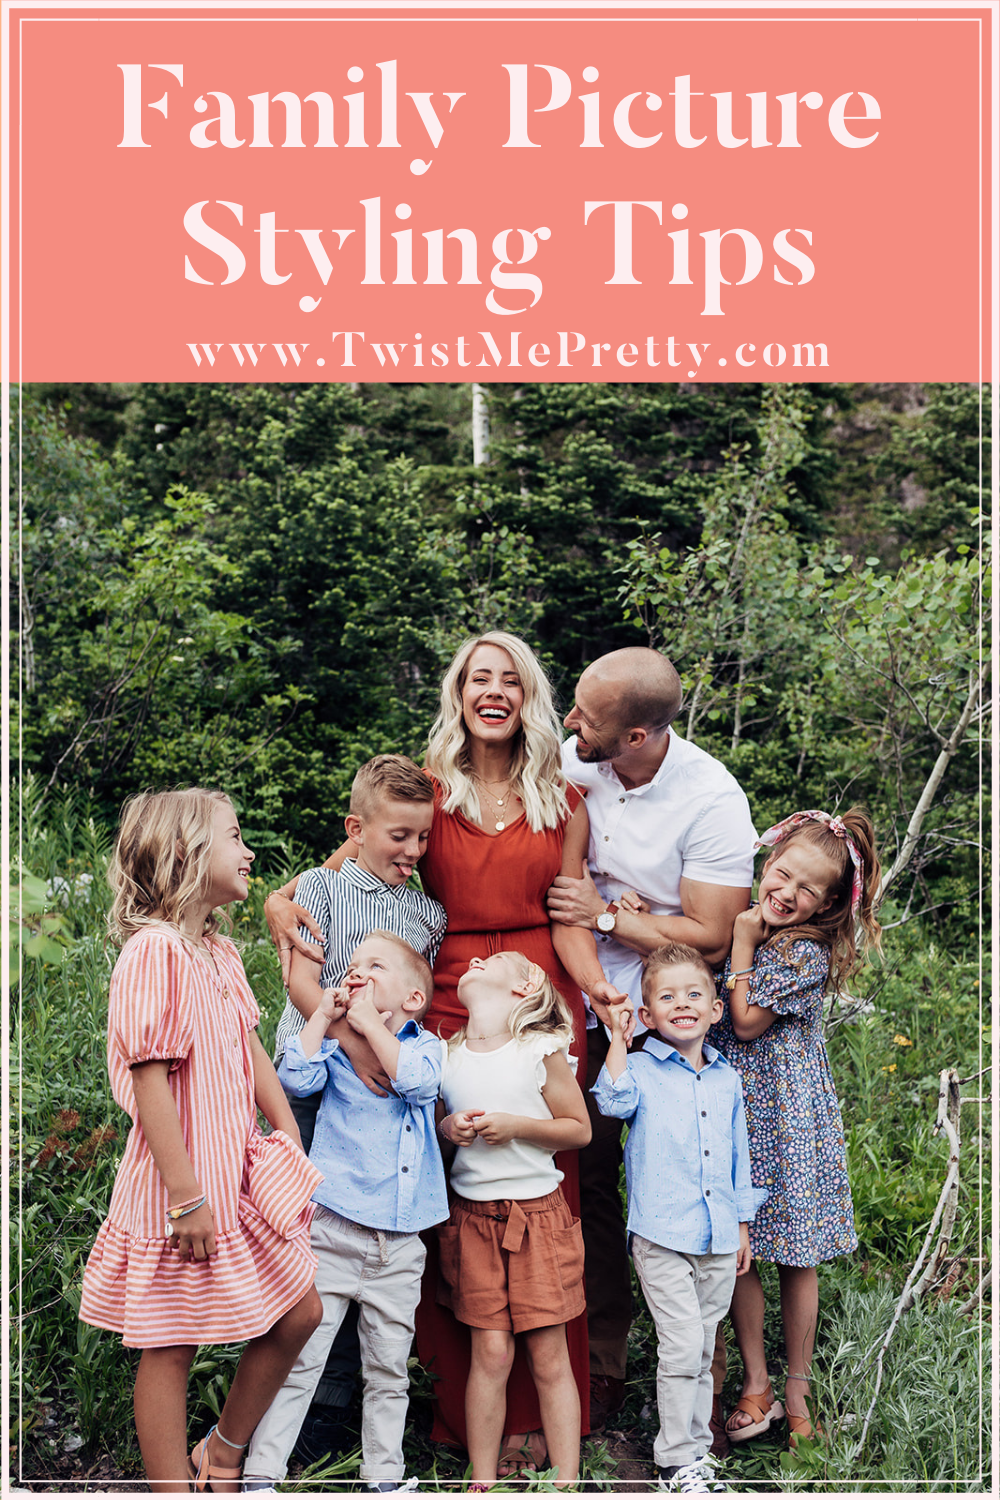 Family Picture Styling Tips www.twistmepretty.com